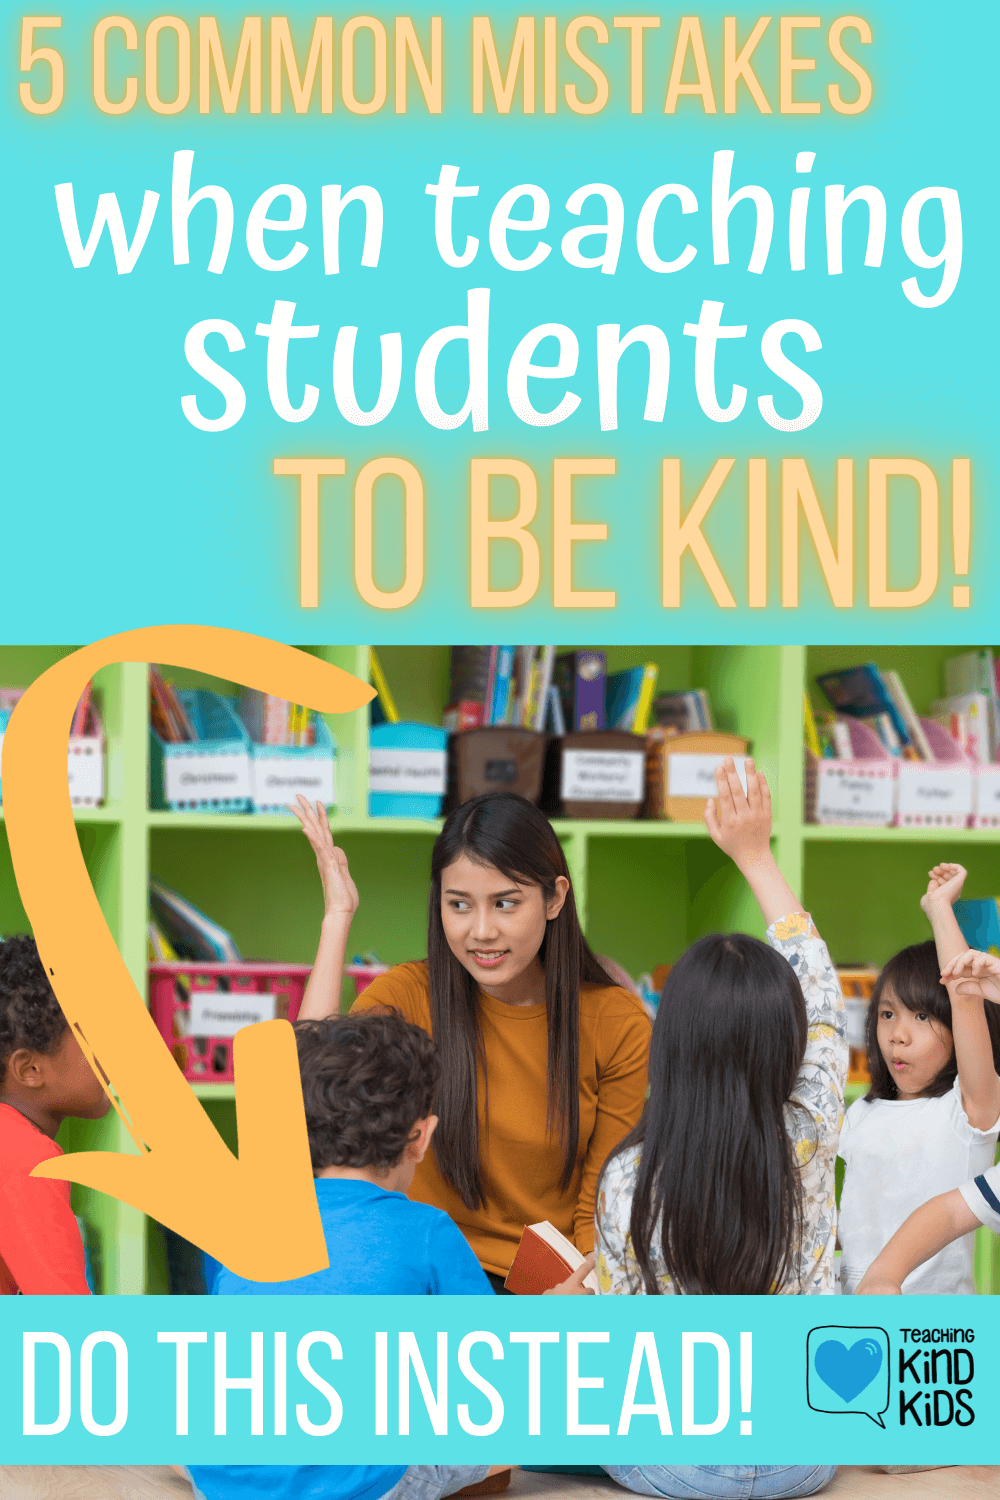 5 common mistakes educators make when teaching kids to be kind and more importantly, quick fixes to make kindness more of a habit.